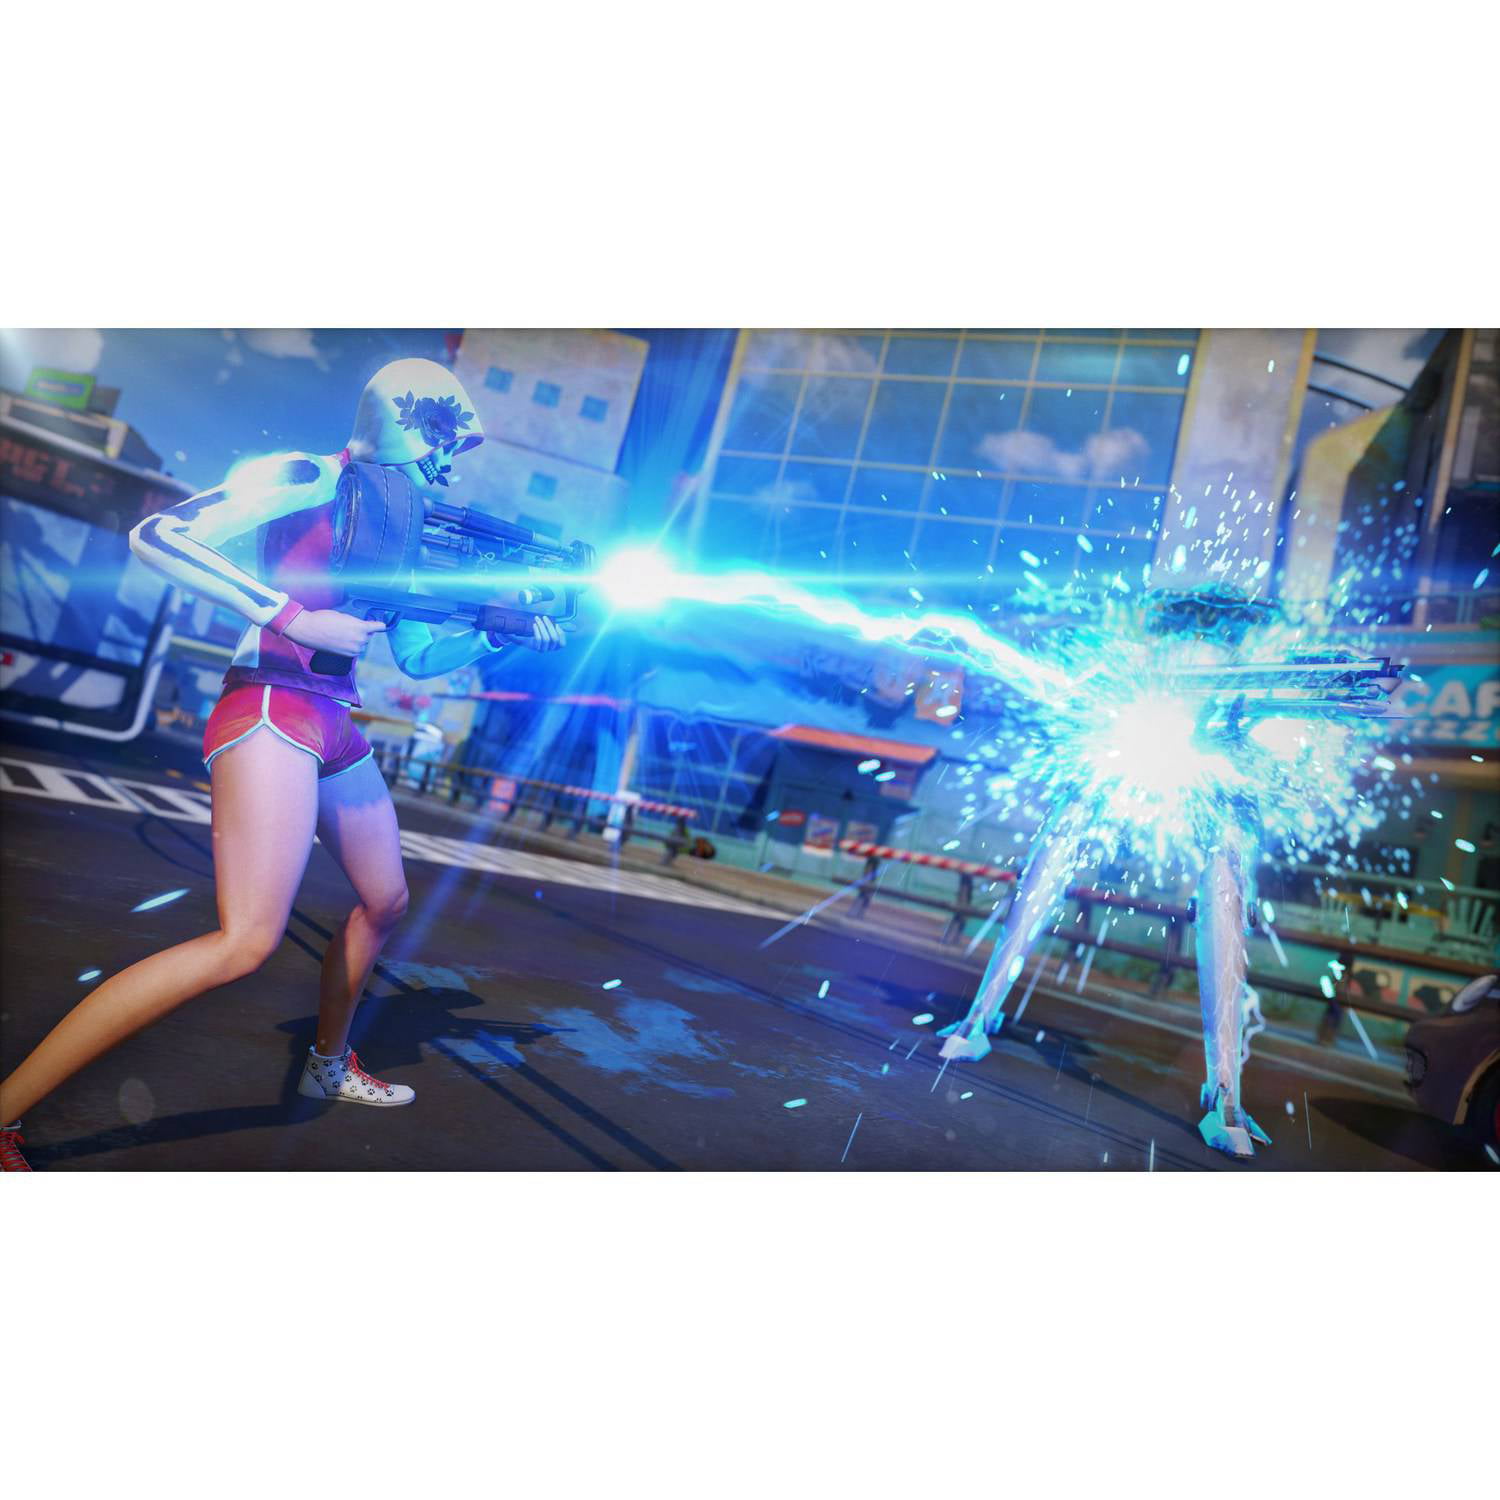 Microsoft Stores' Sunset Overdrive Launch Events & Pre-order Deals - Xbox  Wire